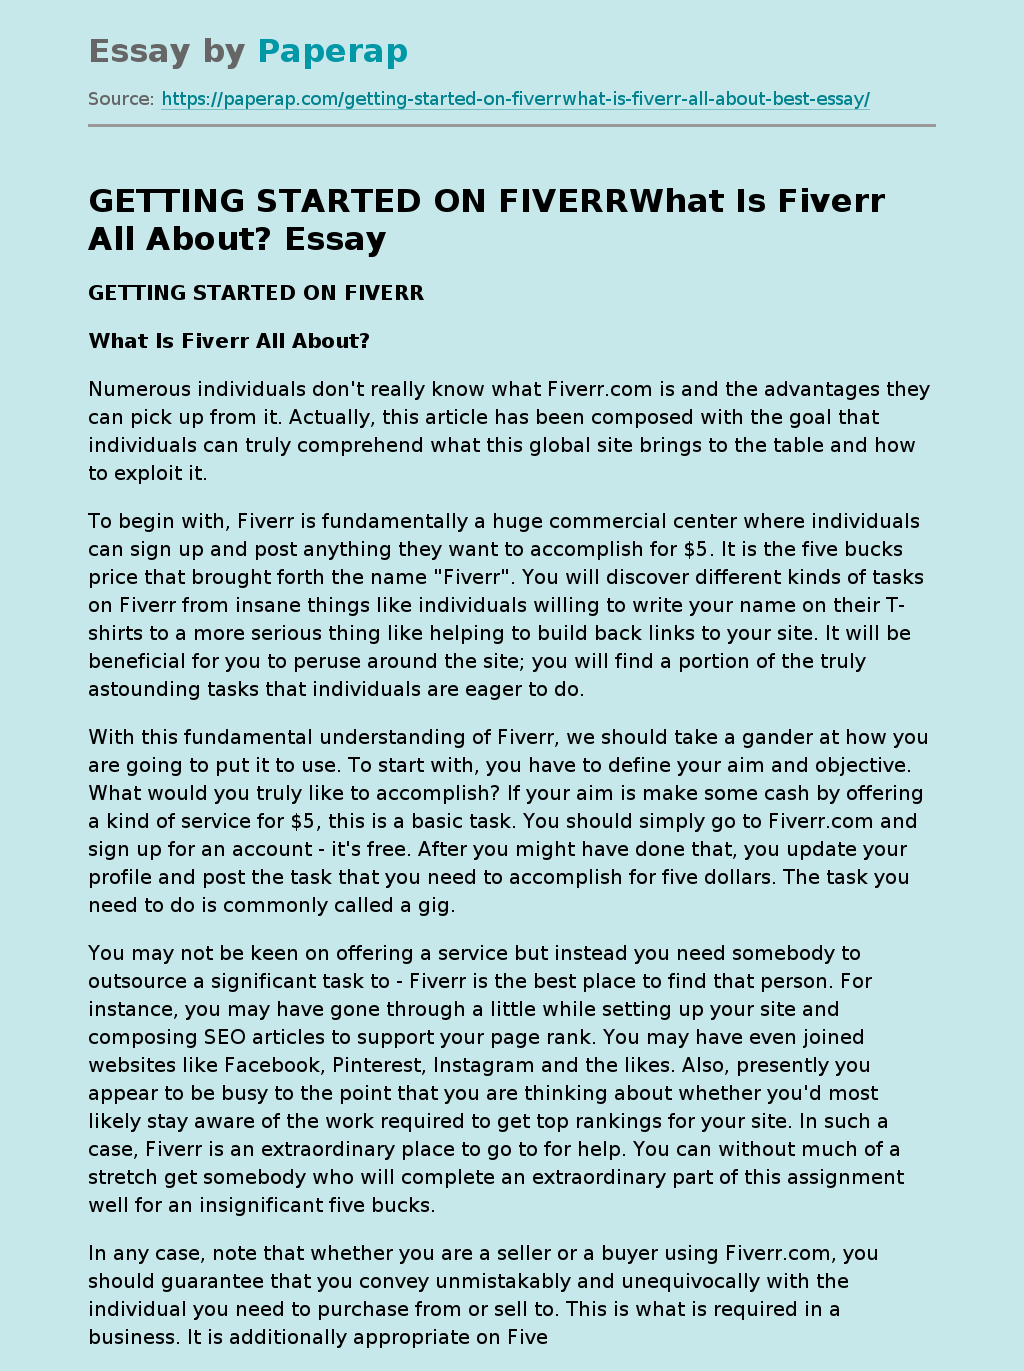 GETTING STARTED ON FIVERRWhat Is Fiverr All About?